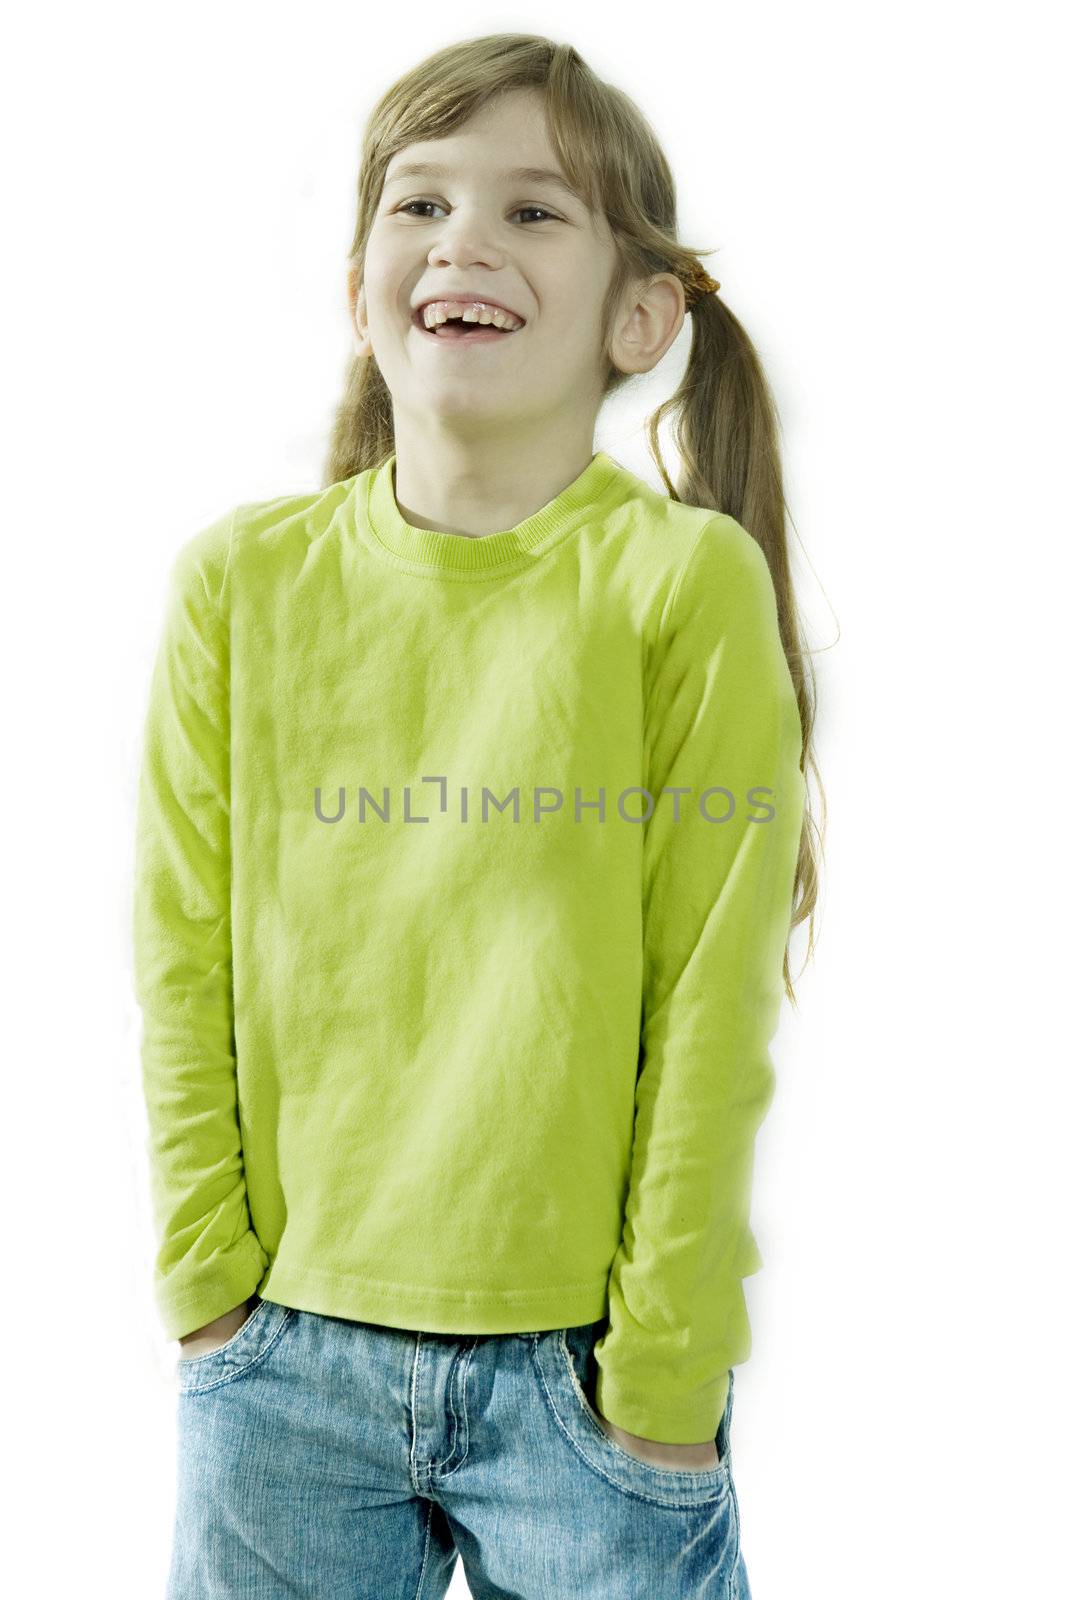 portrait of young smiling cute girl. Isolated. Her hands in pocket